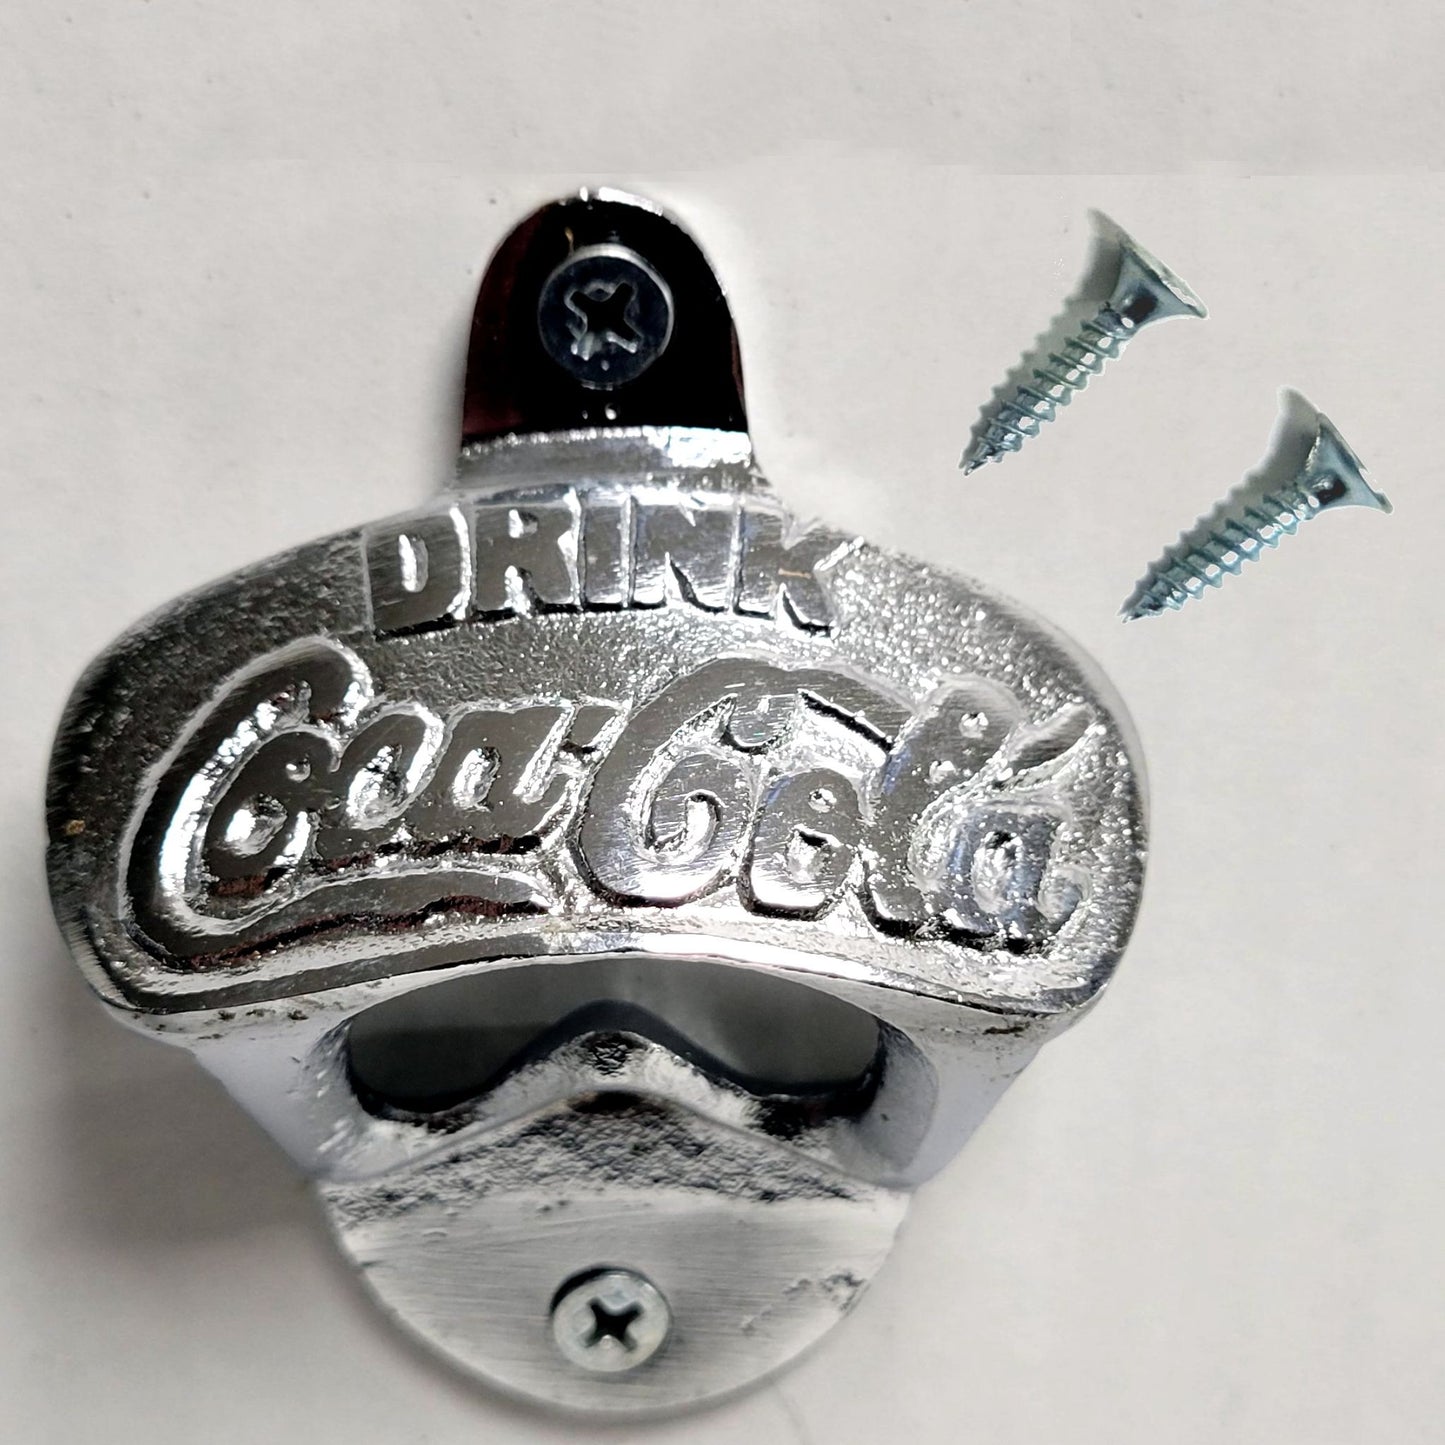 Coca-Cola Chrome Plated Cast Iron Series Wall Mounted Man Cave Bottle Opener